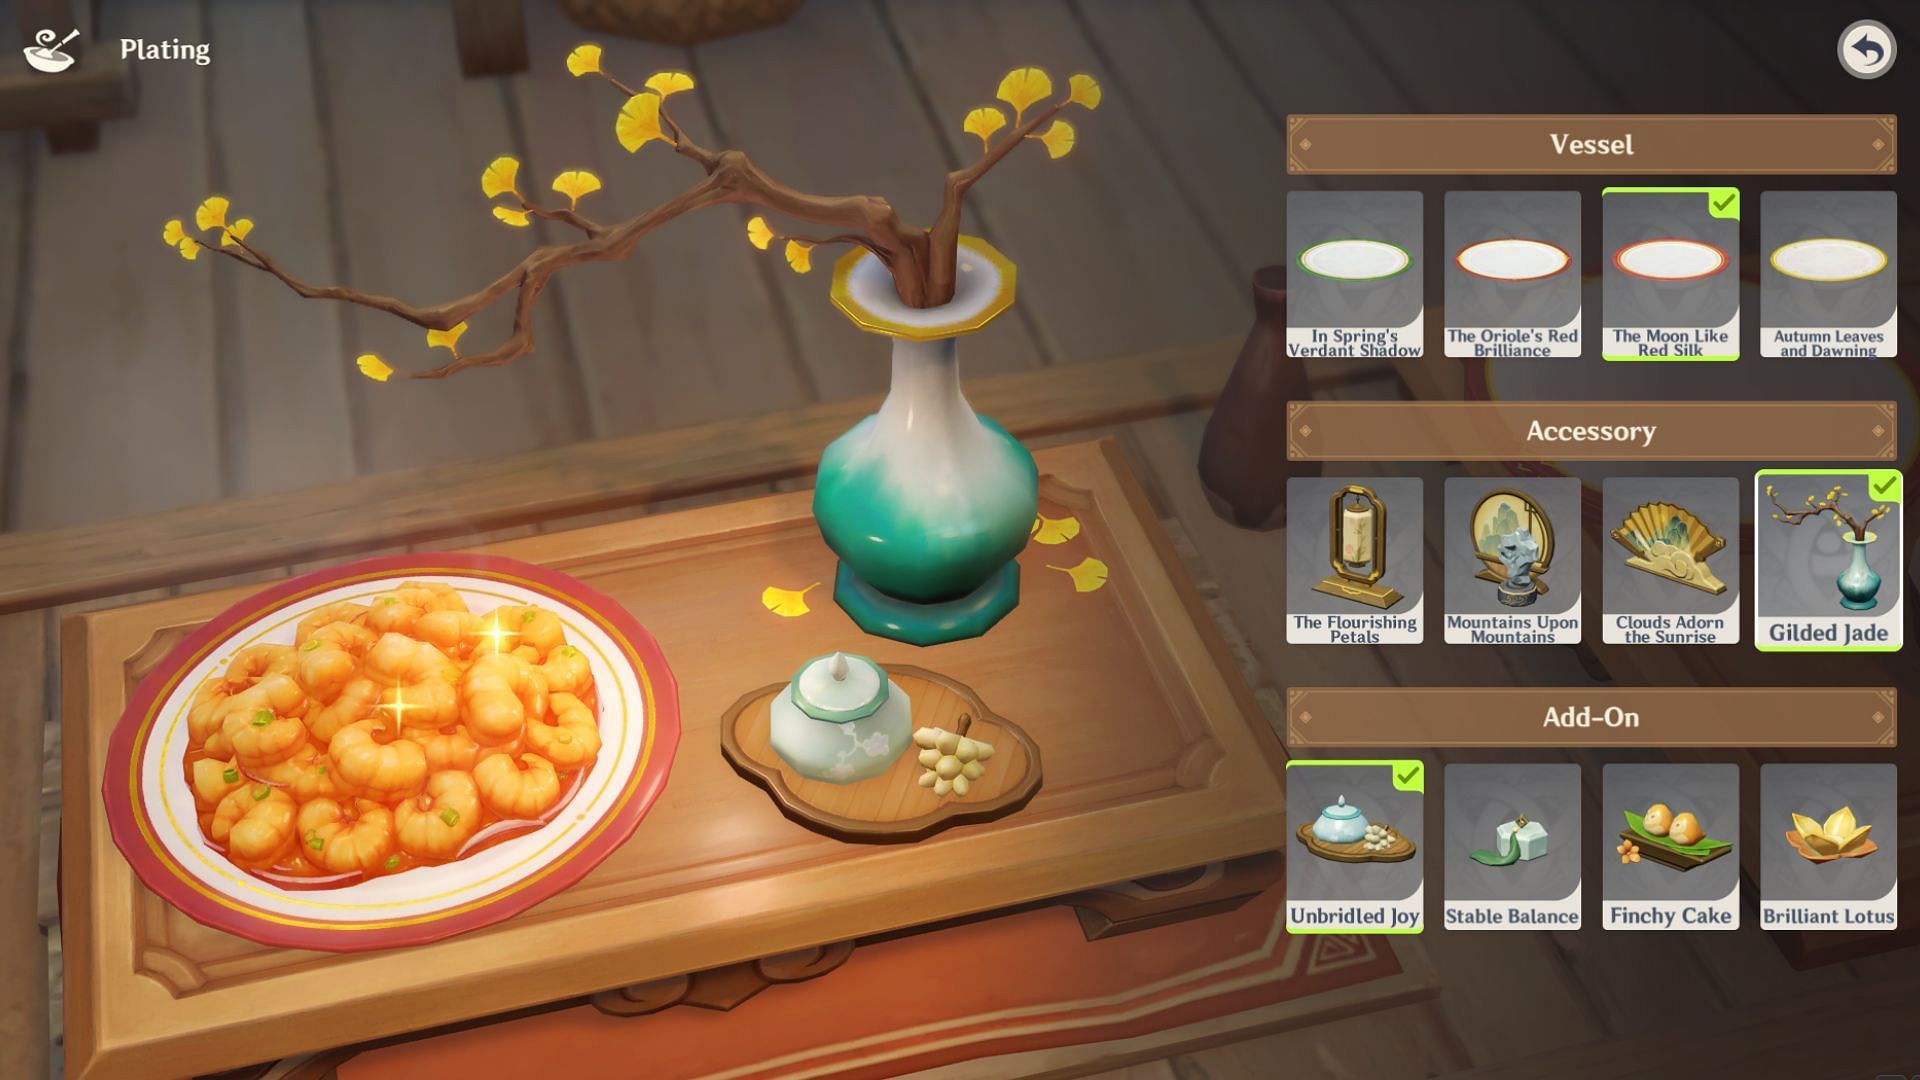 In-game POV of cooking (Image via HoYoverse)